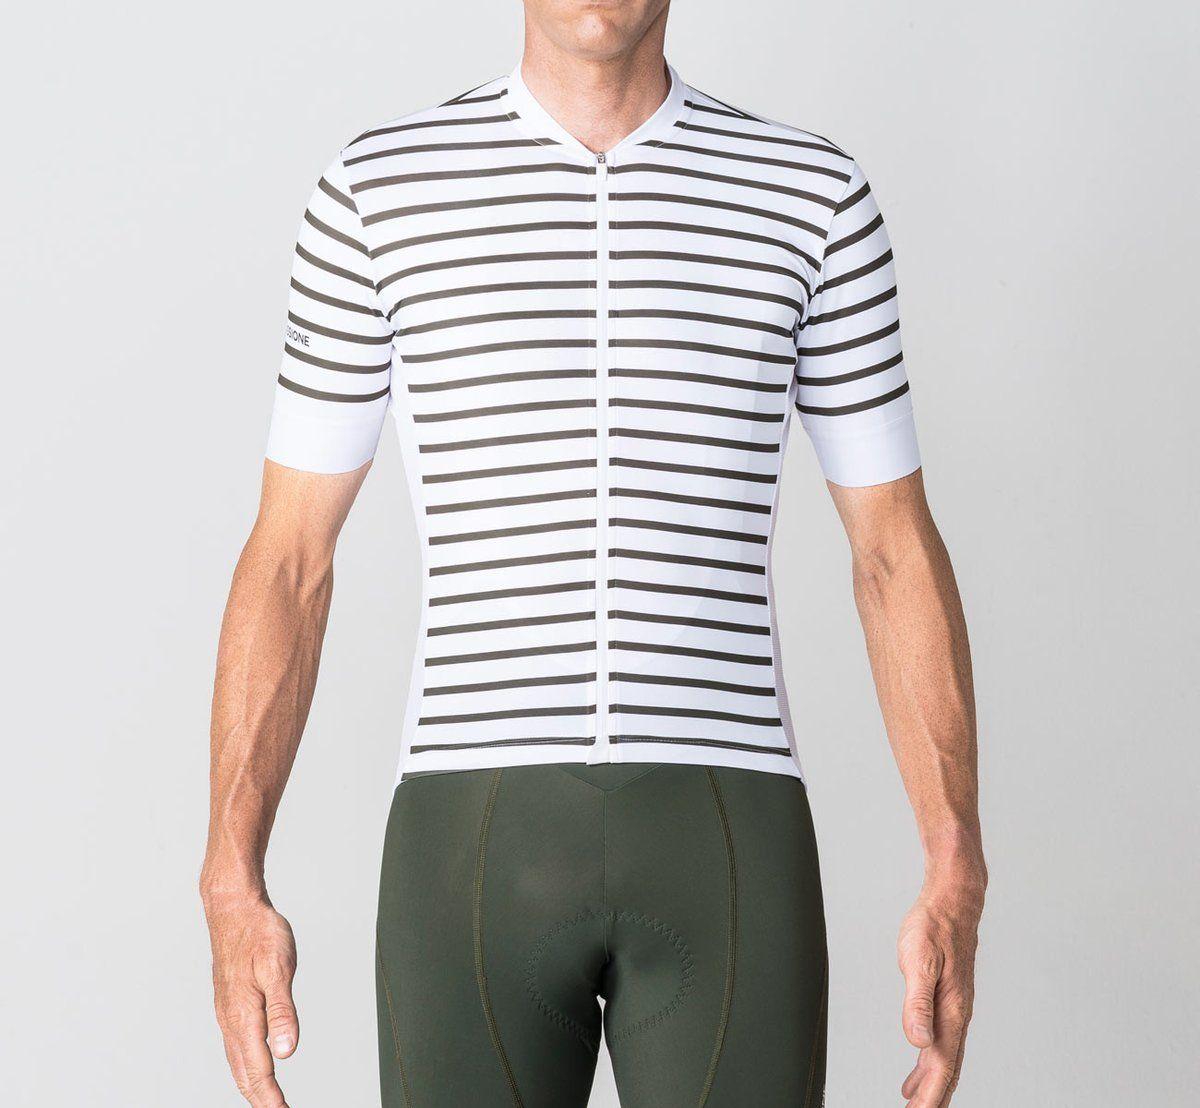 Olive Green and White Logo - Stripes Jersey White/Olive Green | La Passione Cycling Couture